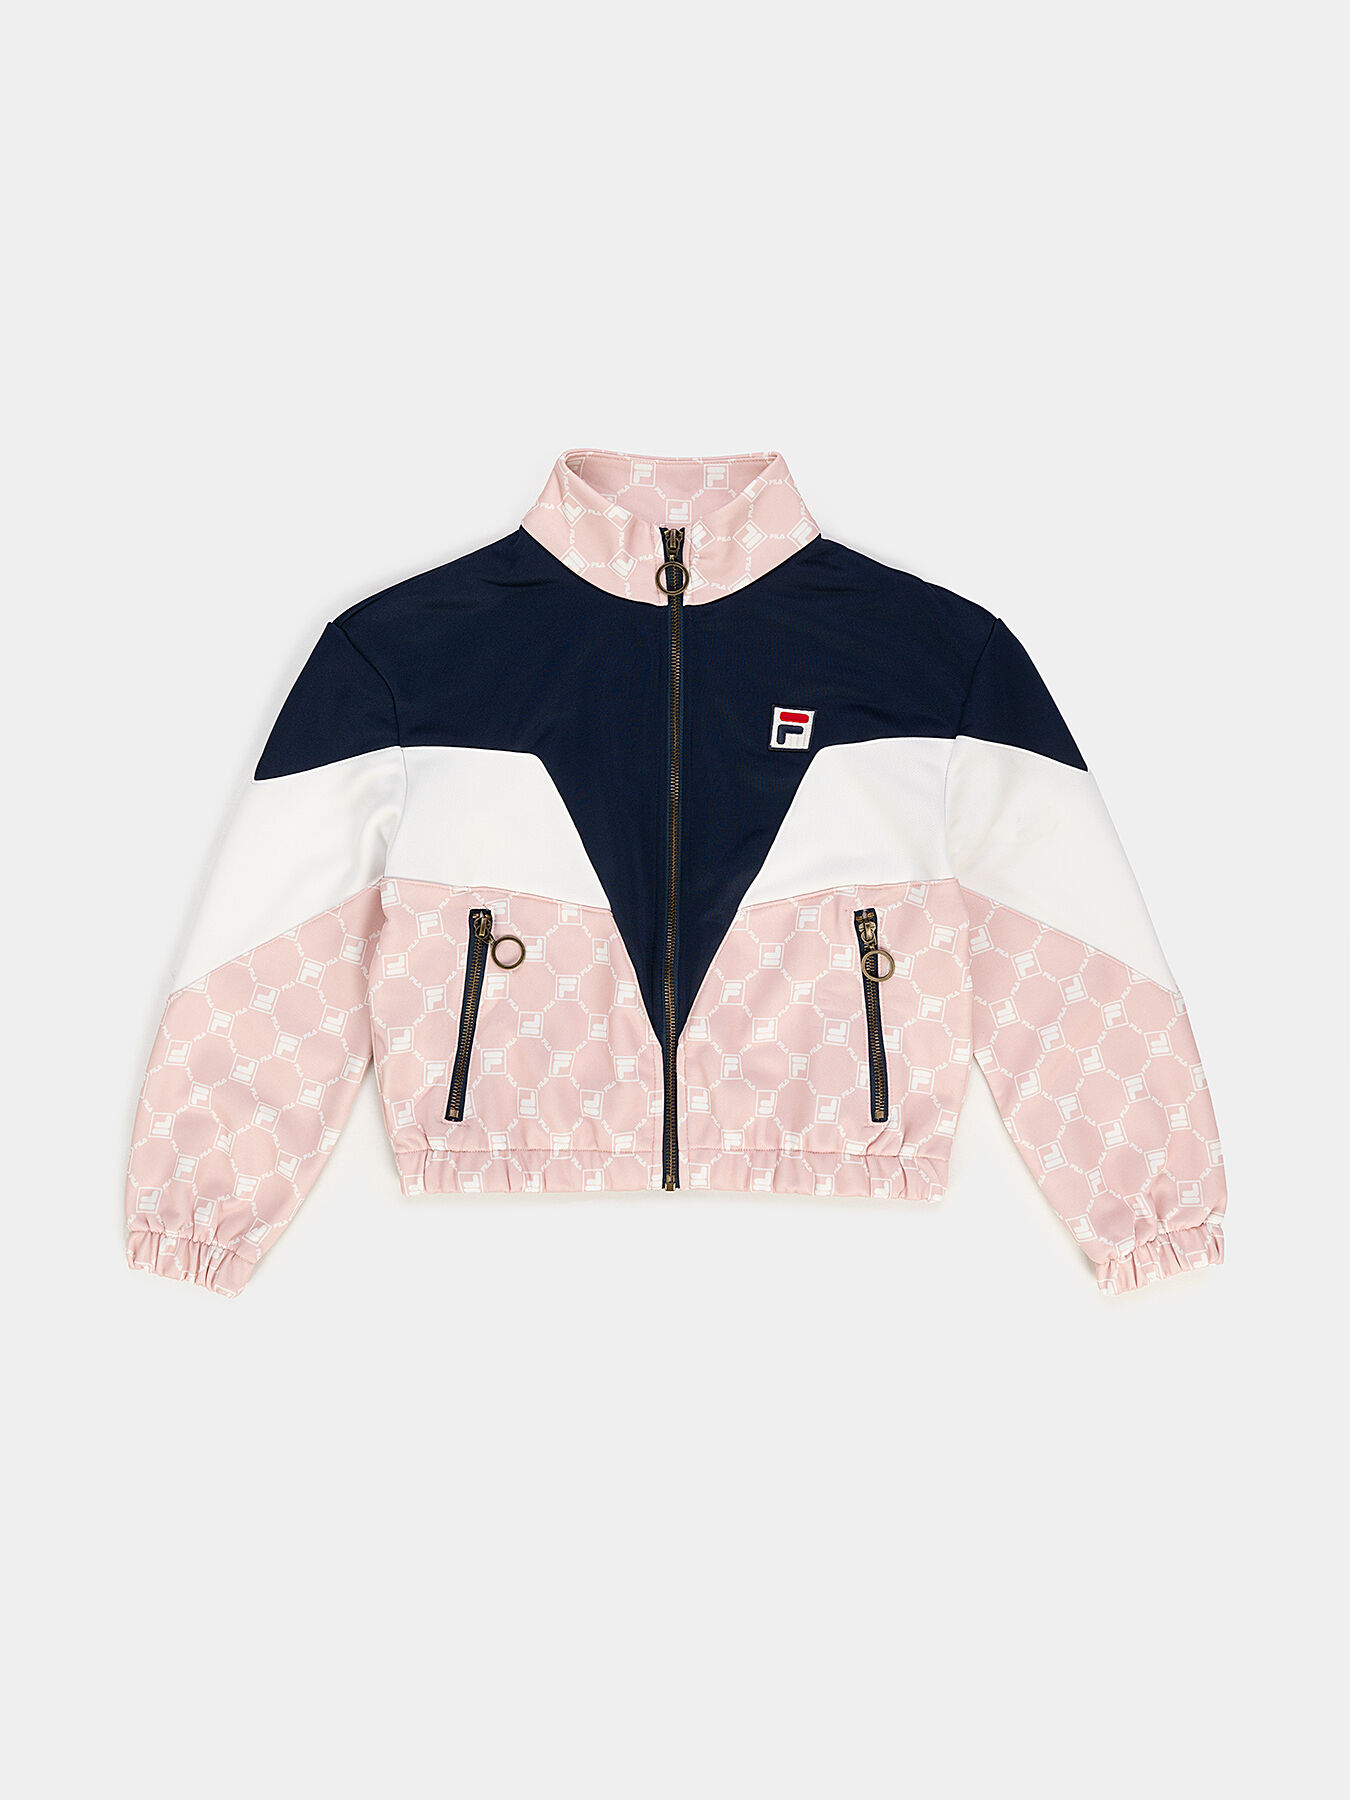 Sale - 21% FILA STORM Jacket Price reduced from € 92,00 to € 73 